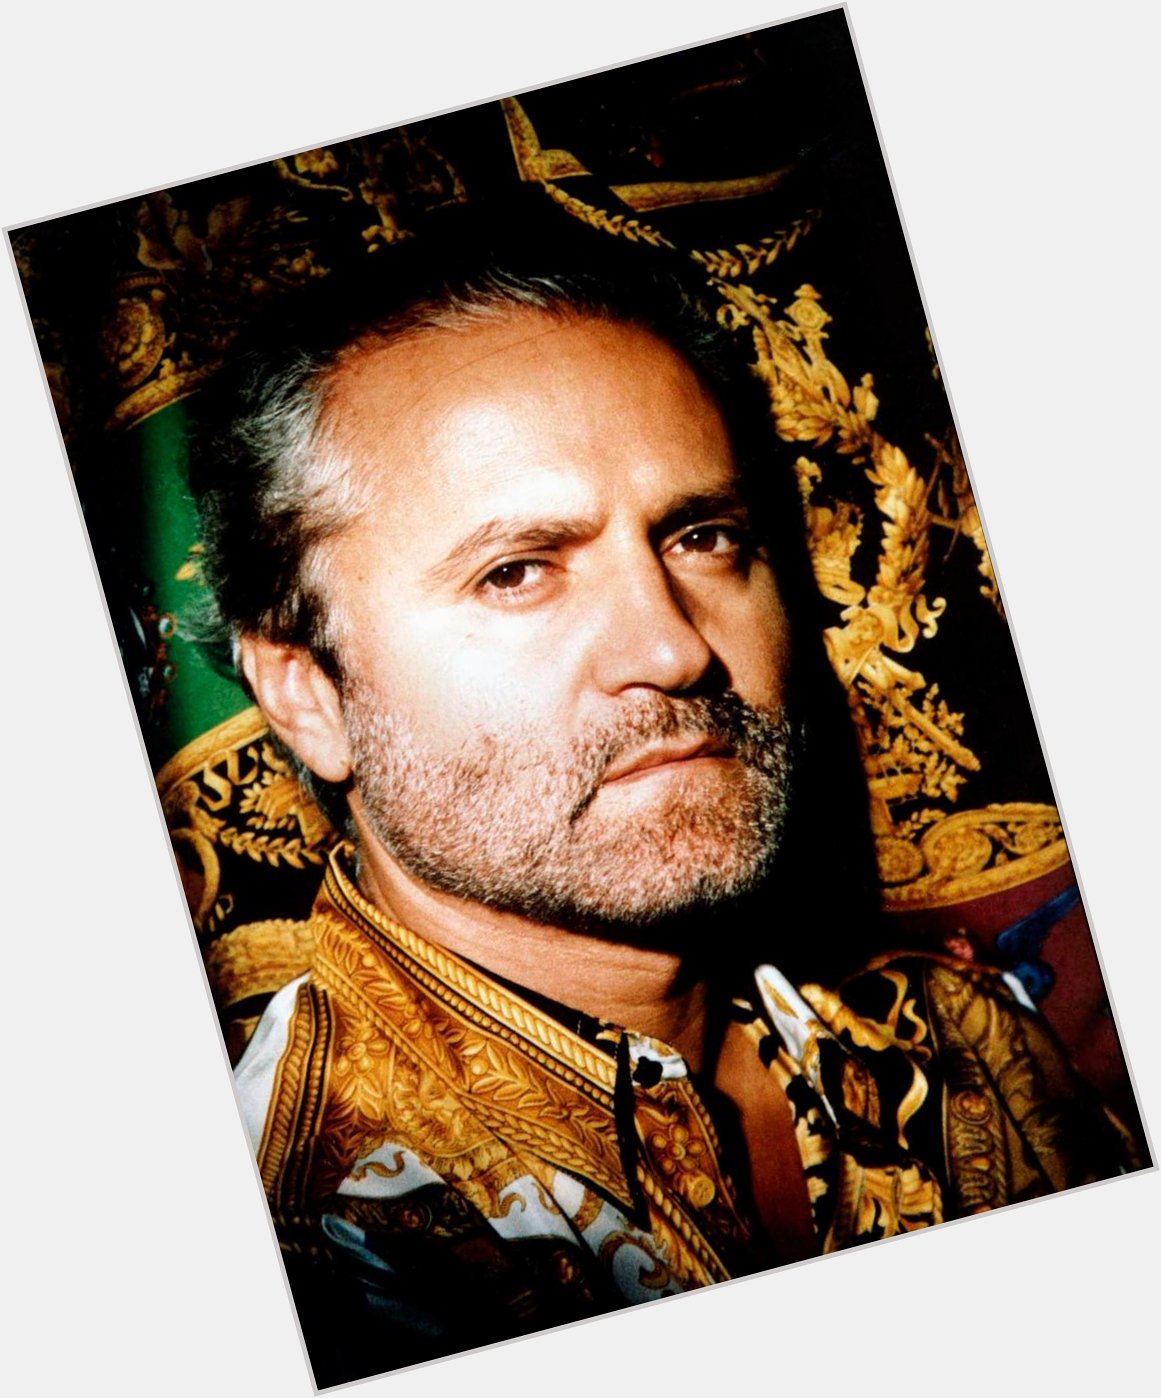 Happy 75th Birthday to fellow Calabrese the legend Gianni Versace 